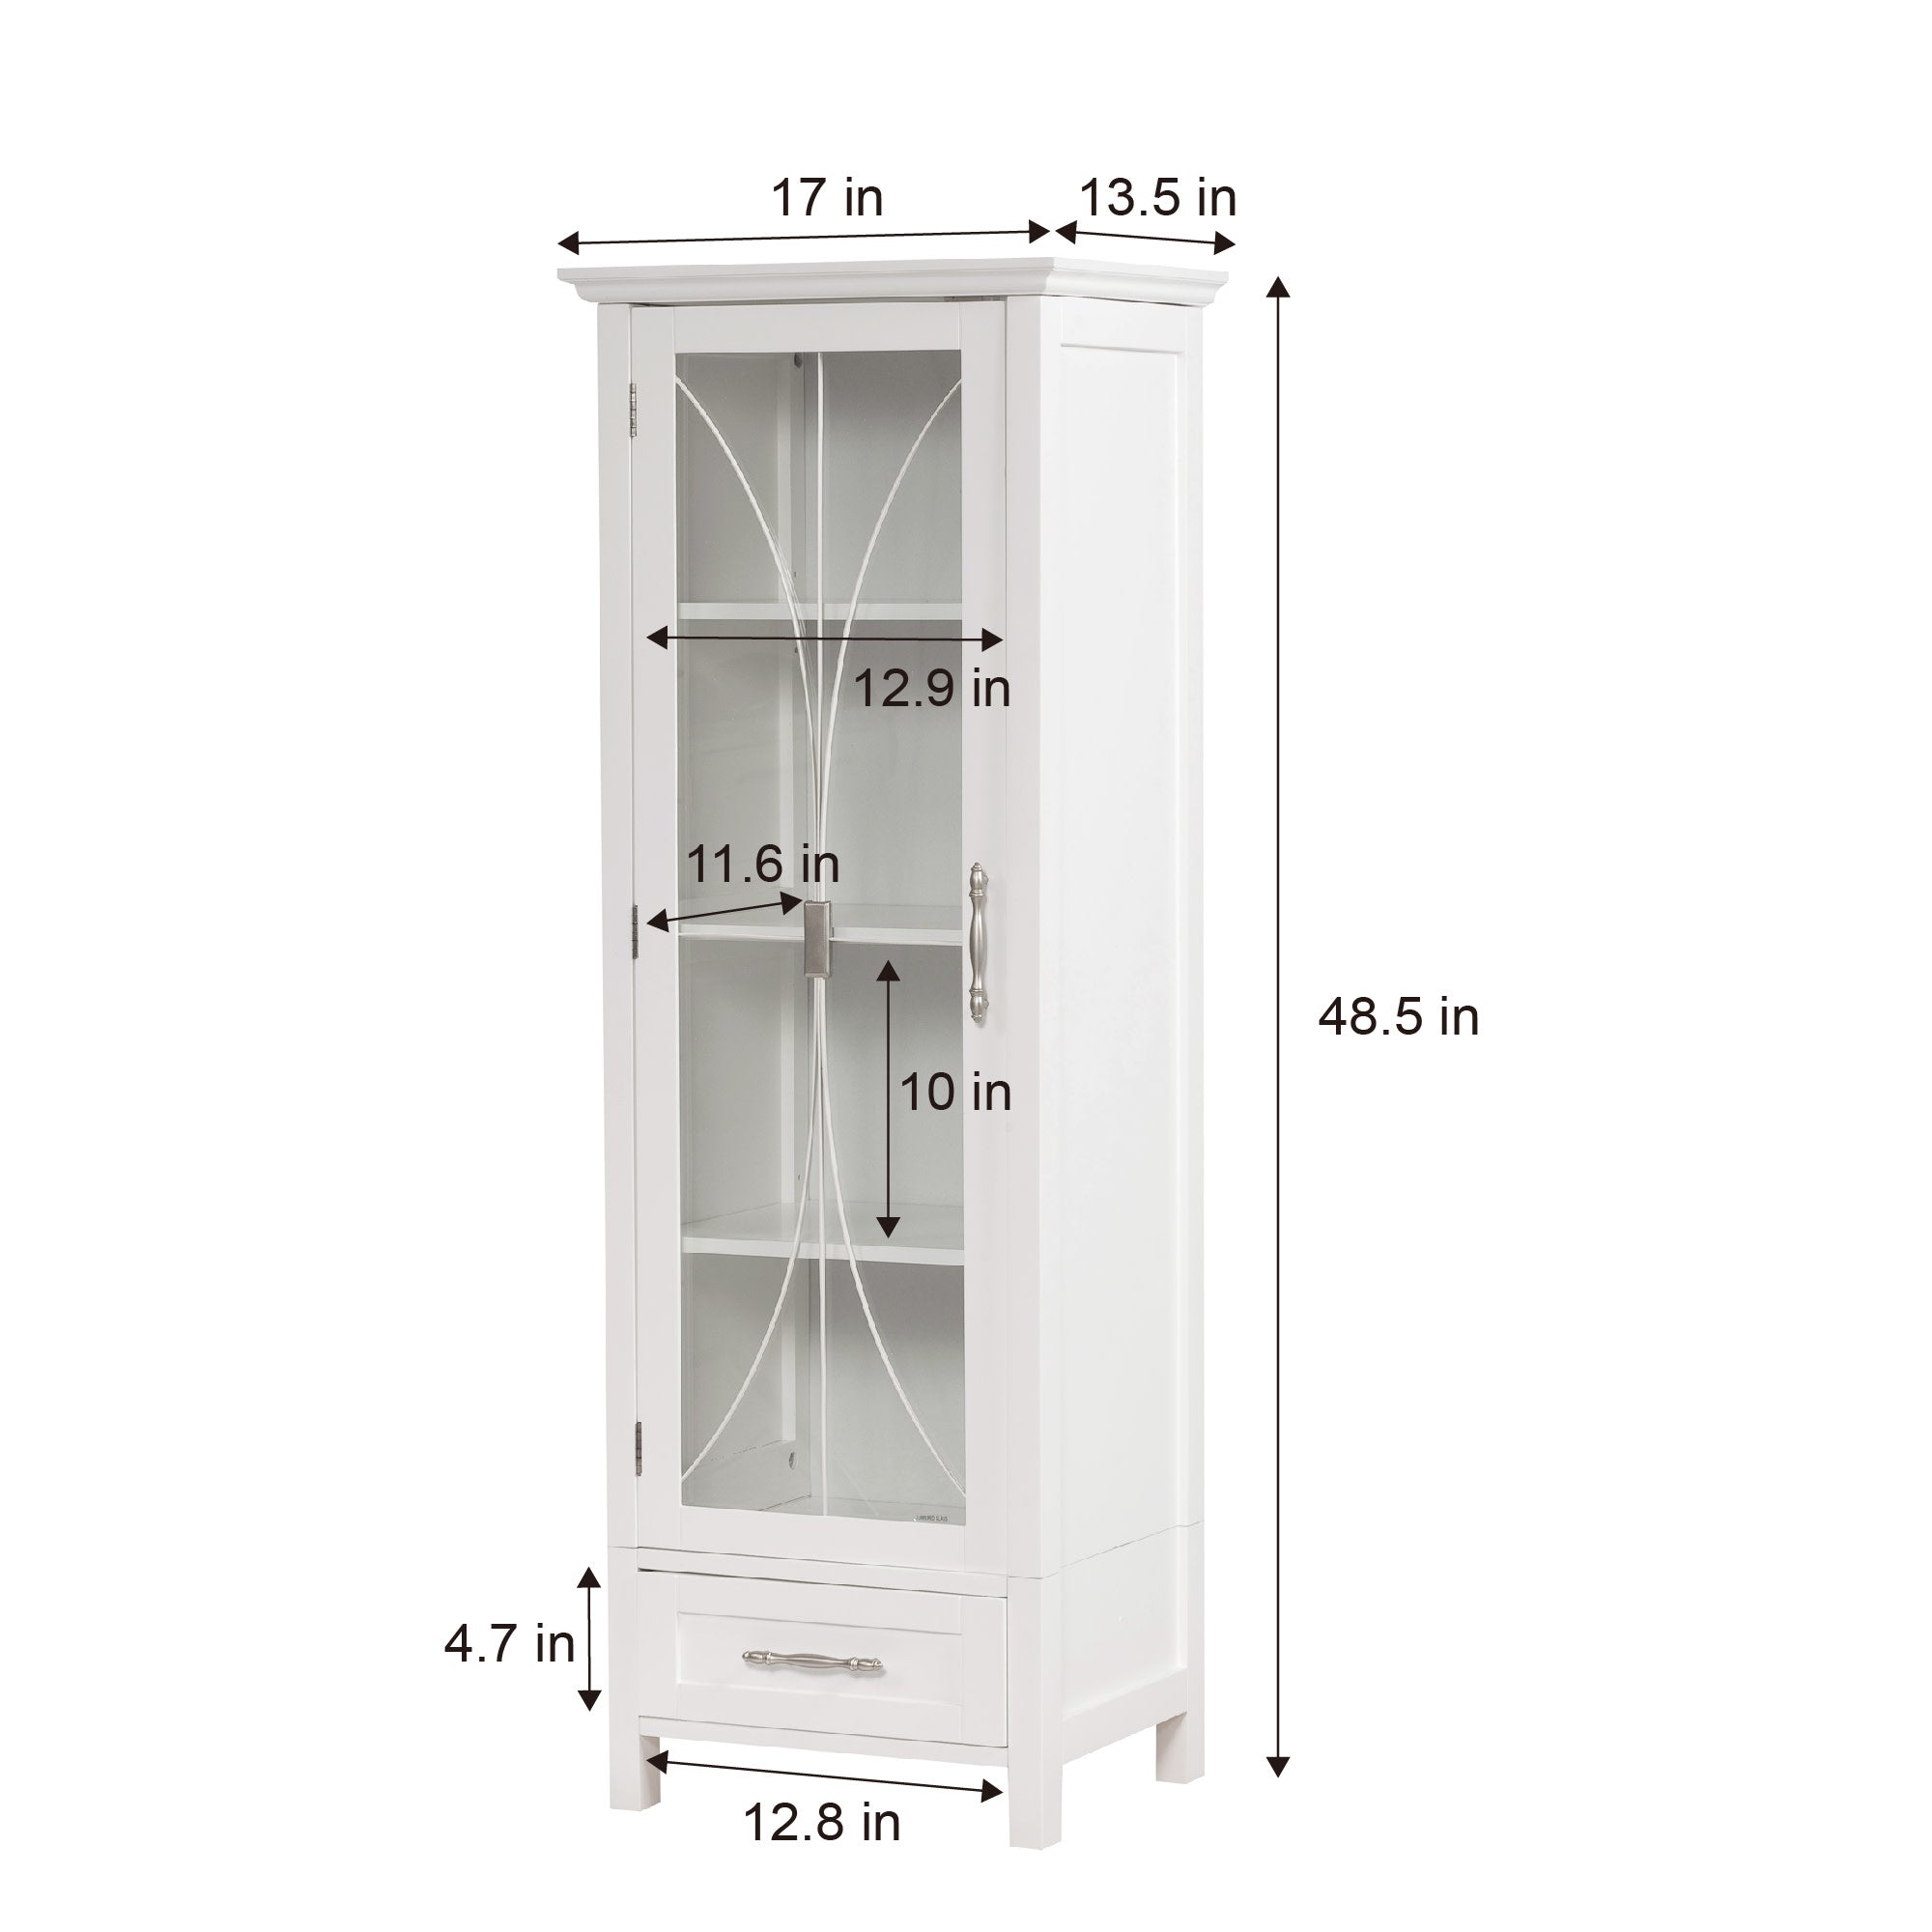 Teamson Home Delaney Free Standing Tall Slim Linen Storage Cabinet Tower with Glass Panel Door